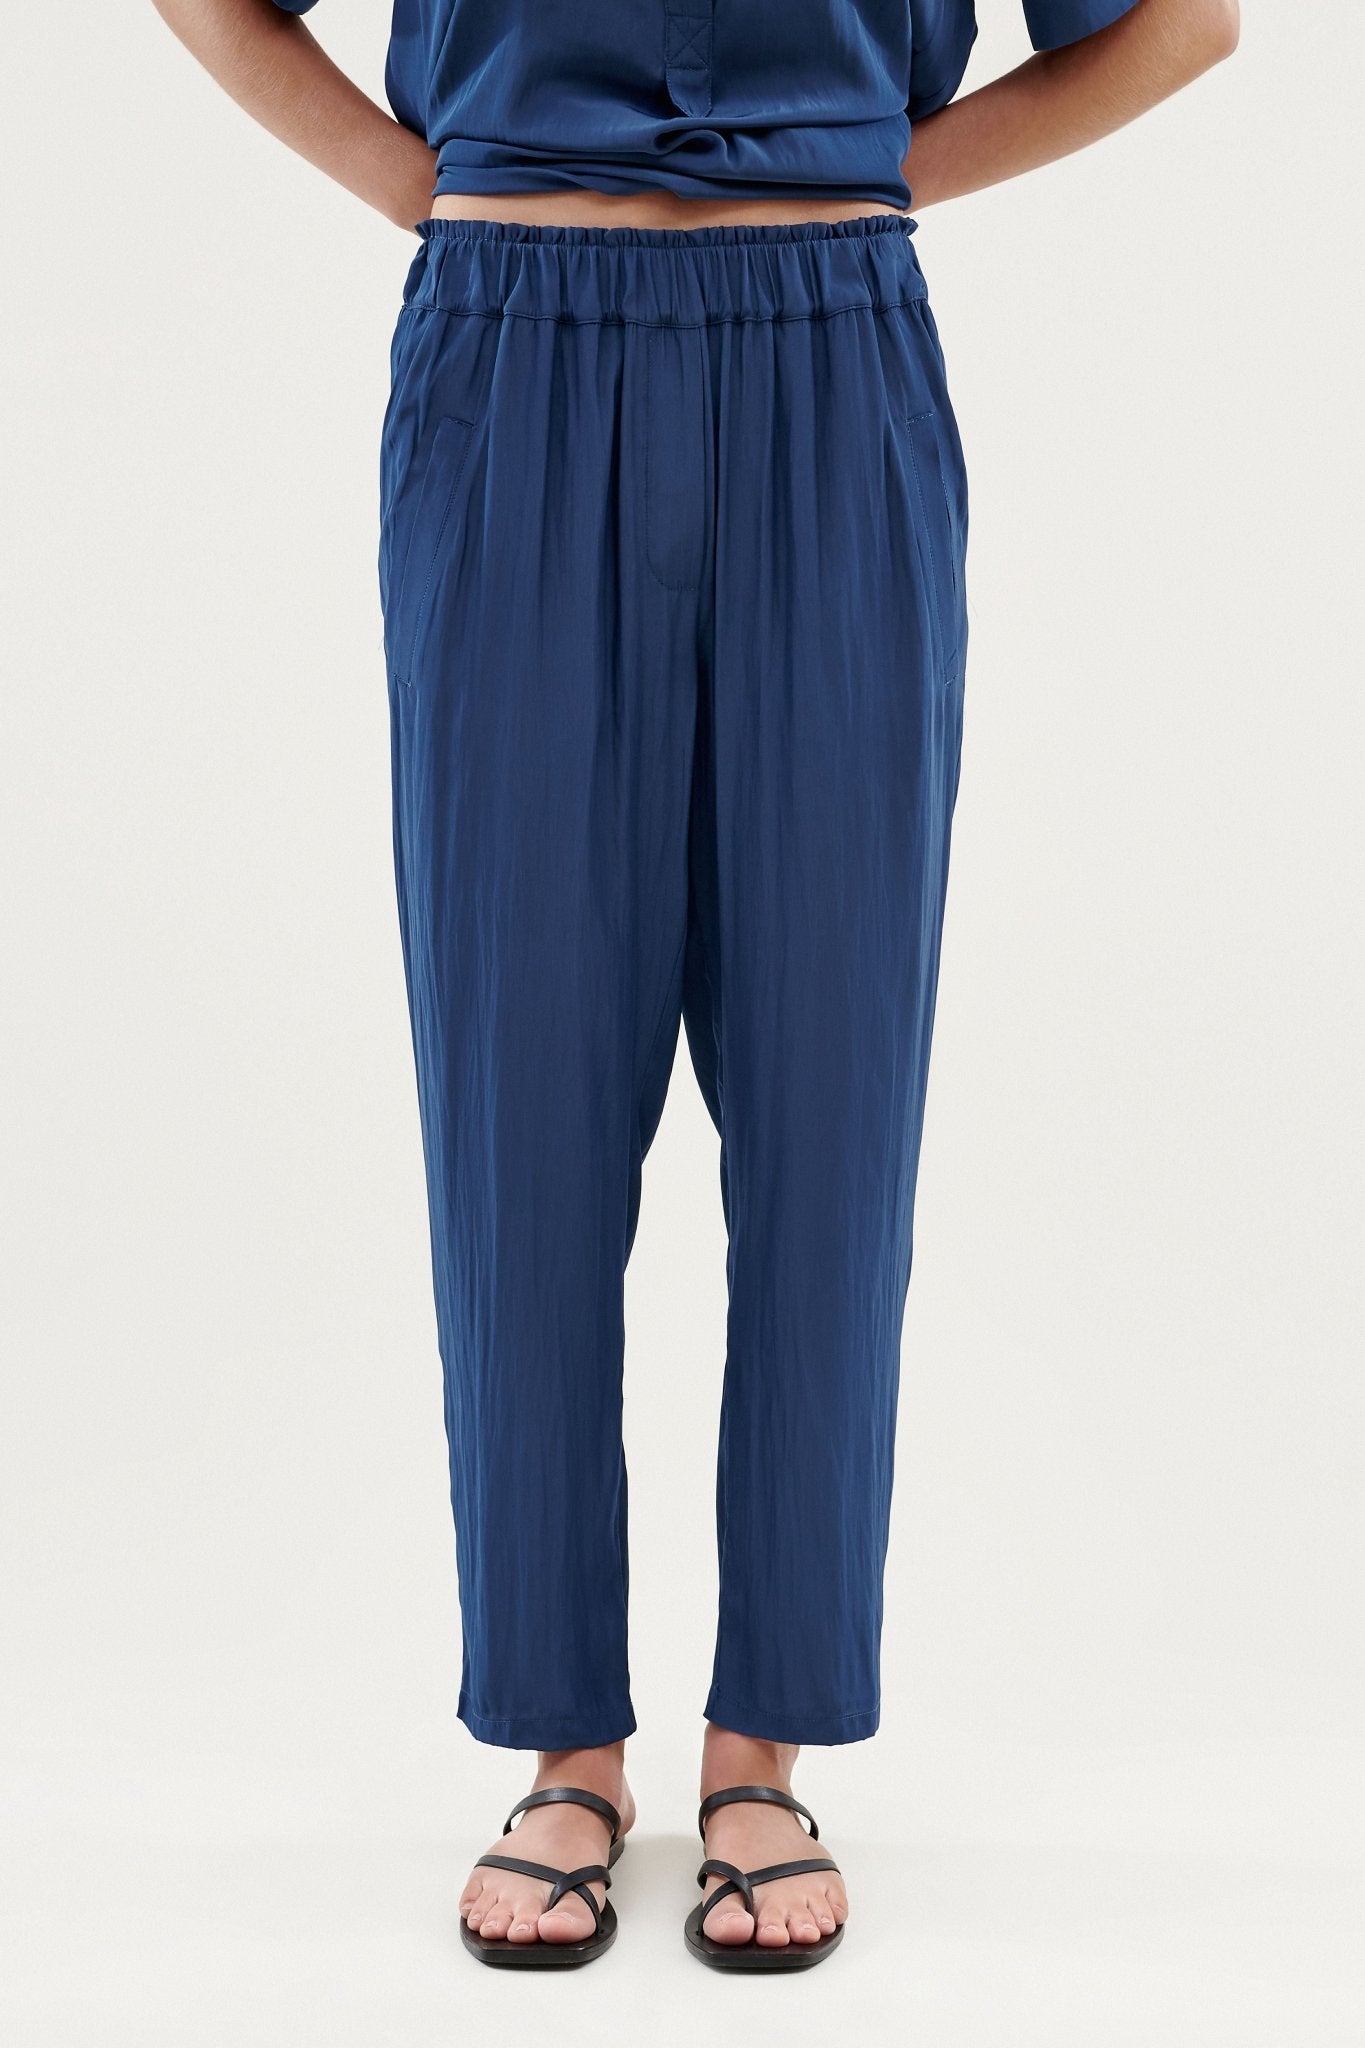 Shop Ena Pant in Ink Blue by Layer’d - Layer'd